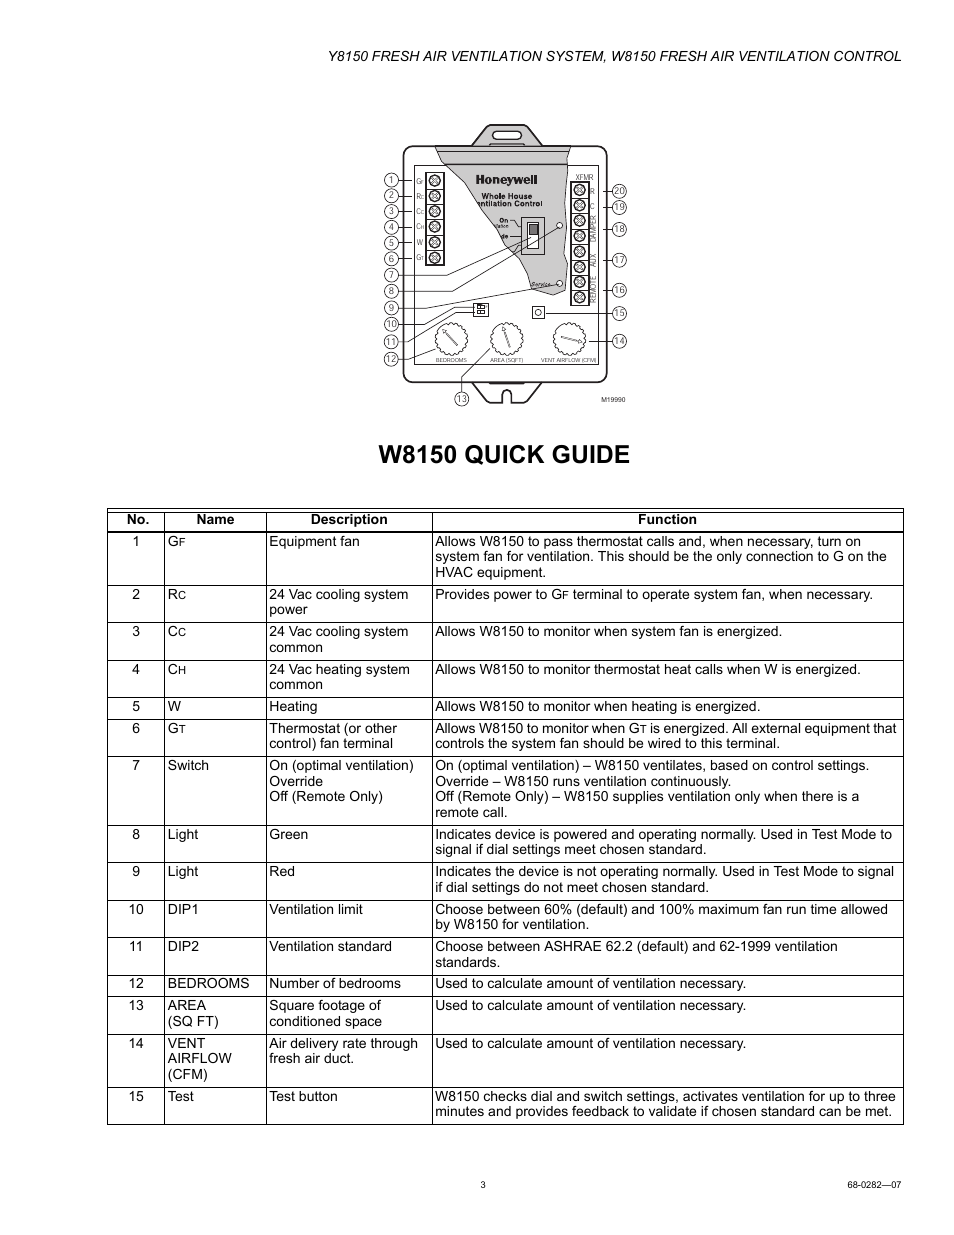 W8150 quick guide | Honeywell Y8150 User Manual | Page 3 / 12